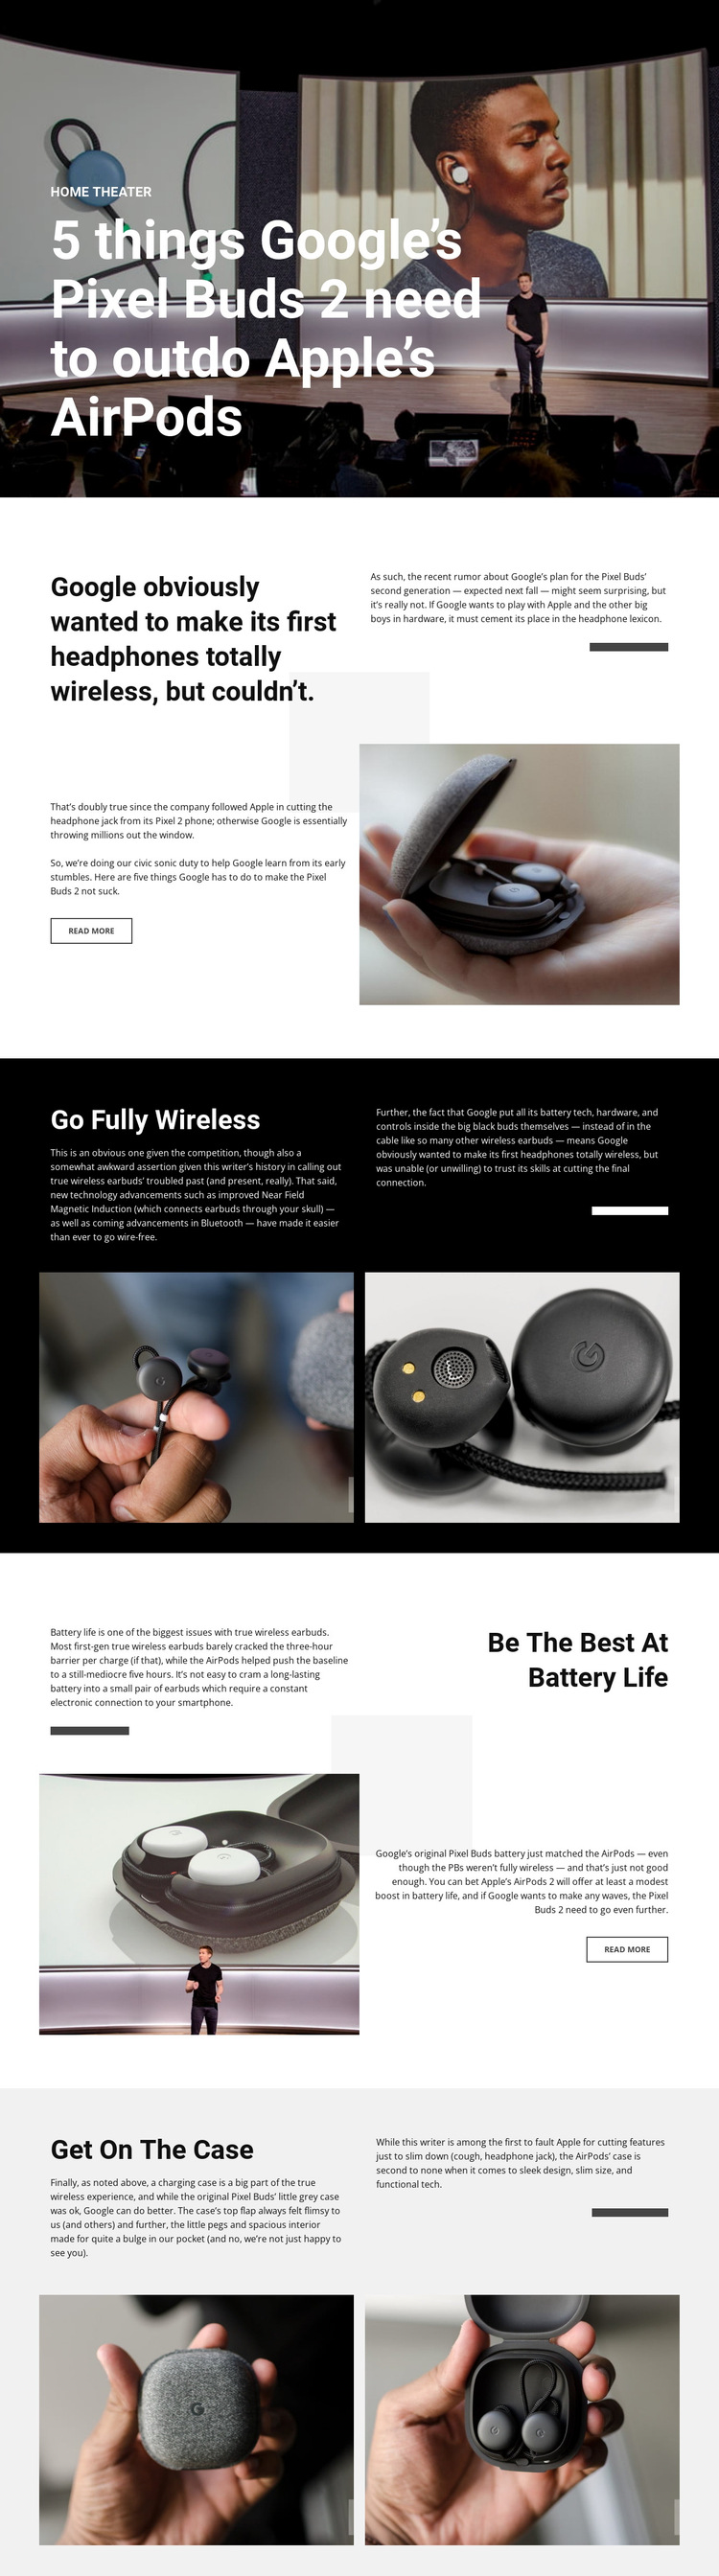 Pixel Buds 2 HTML5 Template